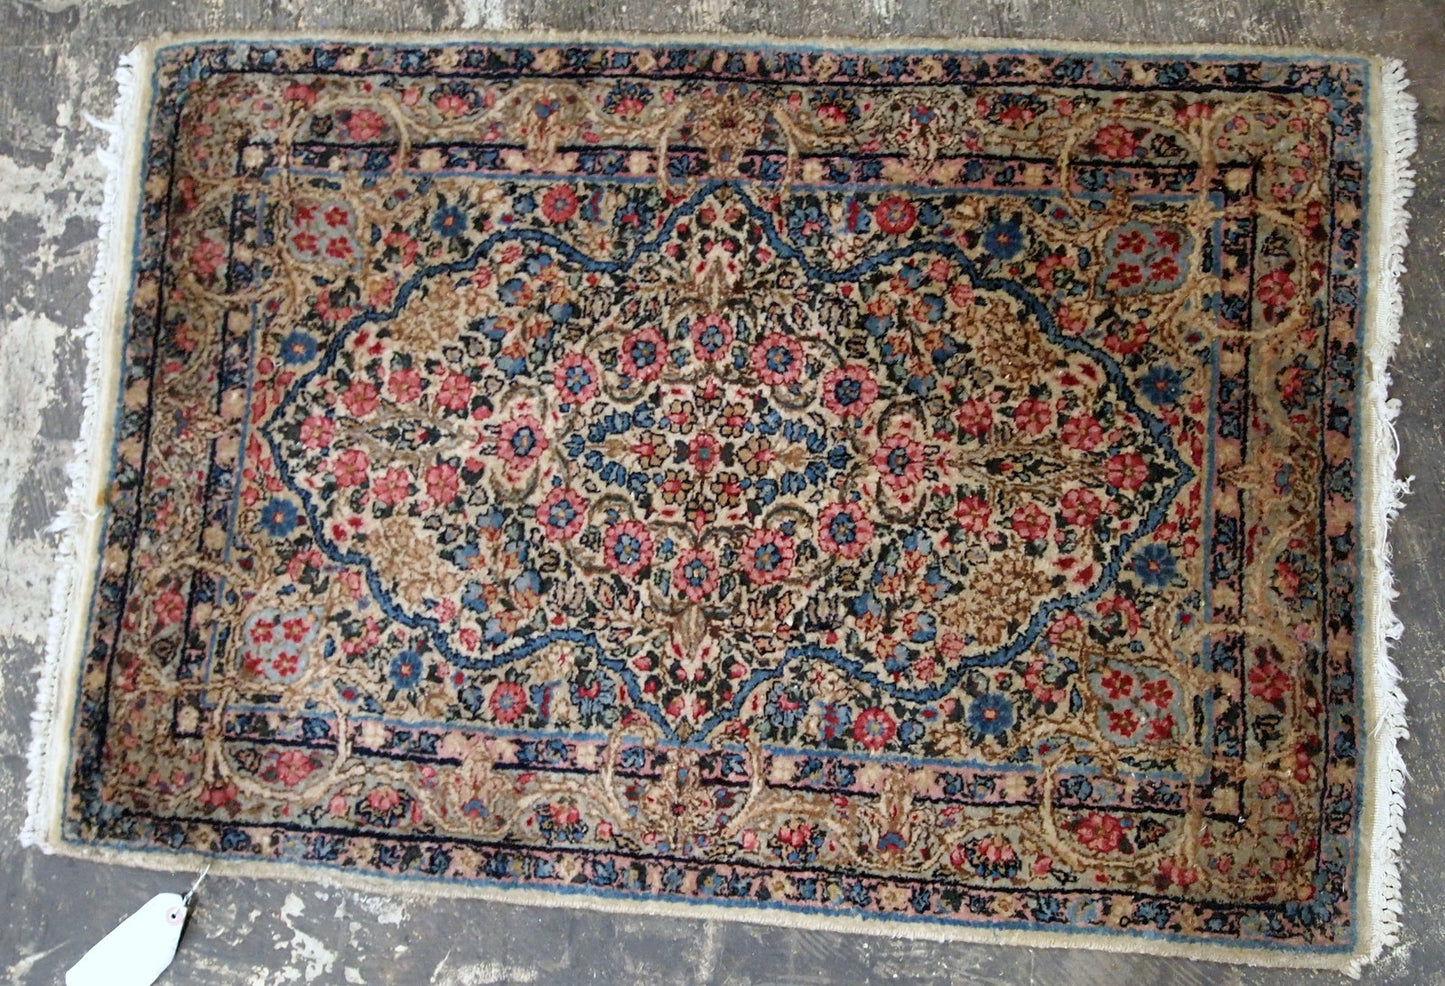 Antique Persian Kerman floral rug in colorful shades. The rug is from the beginning of 20th century in original good condition.